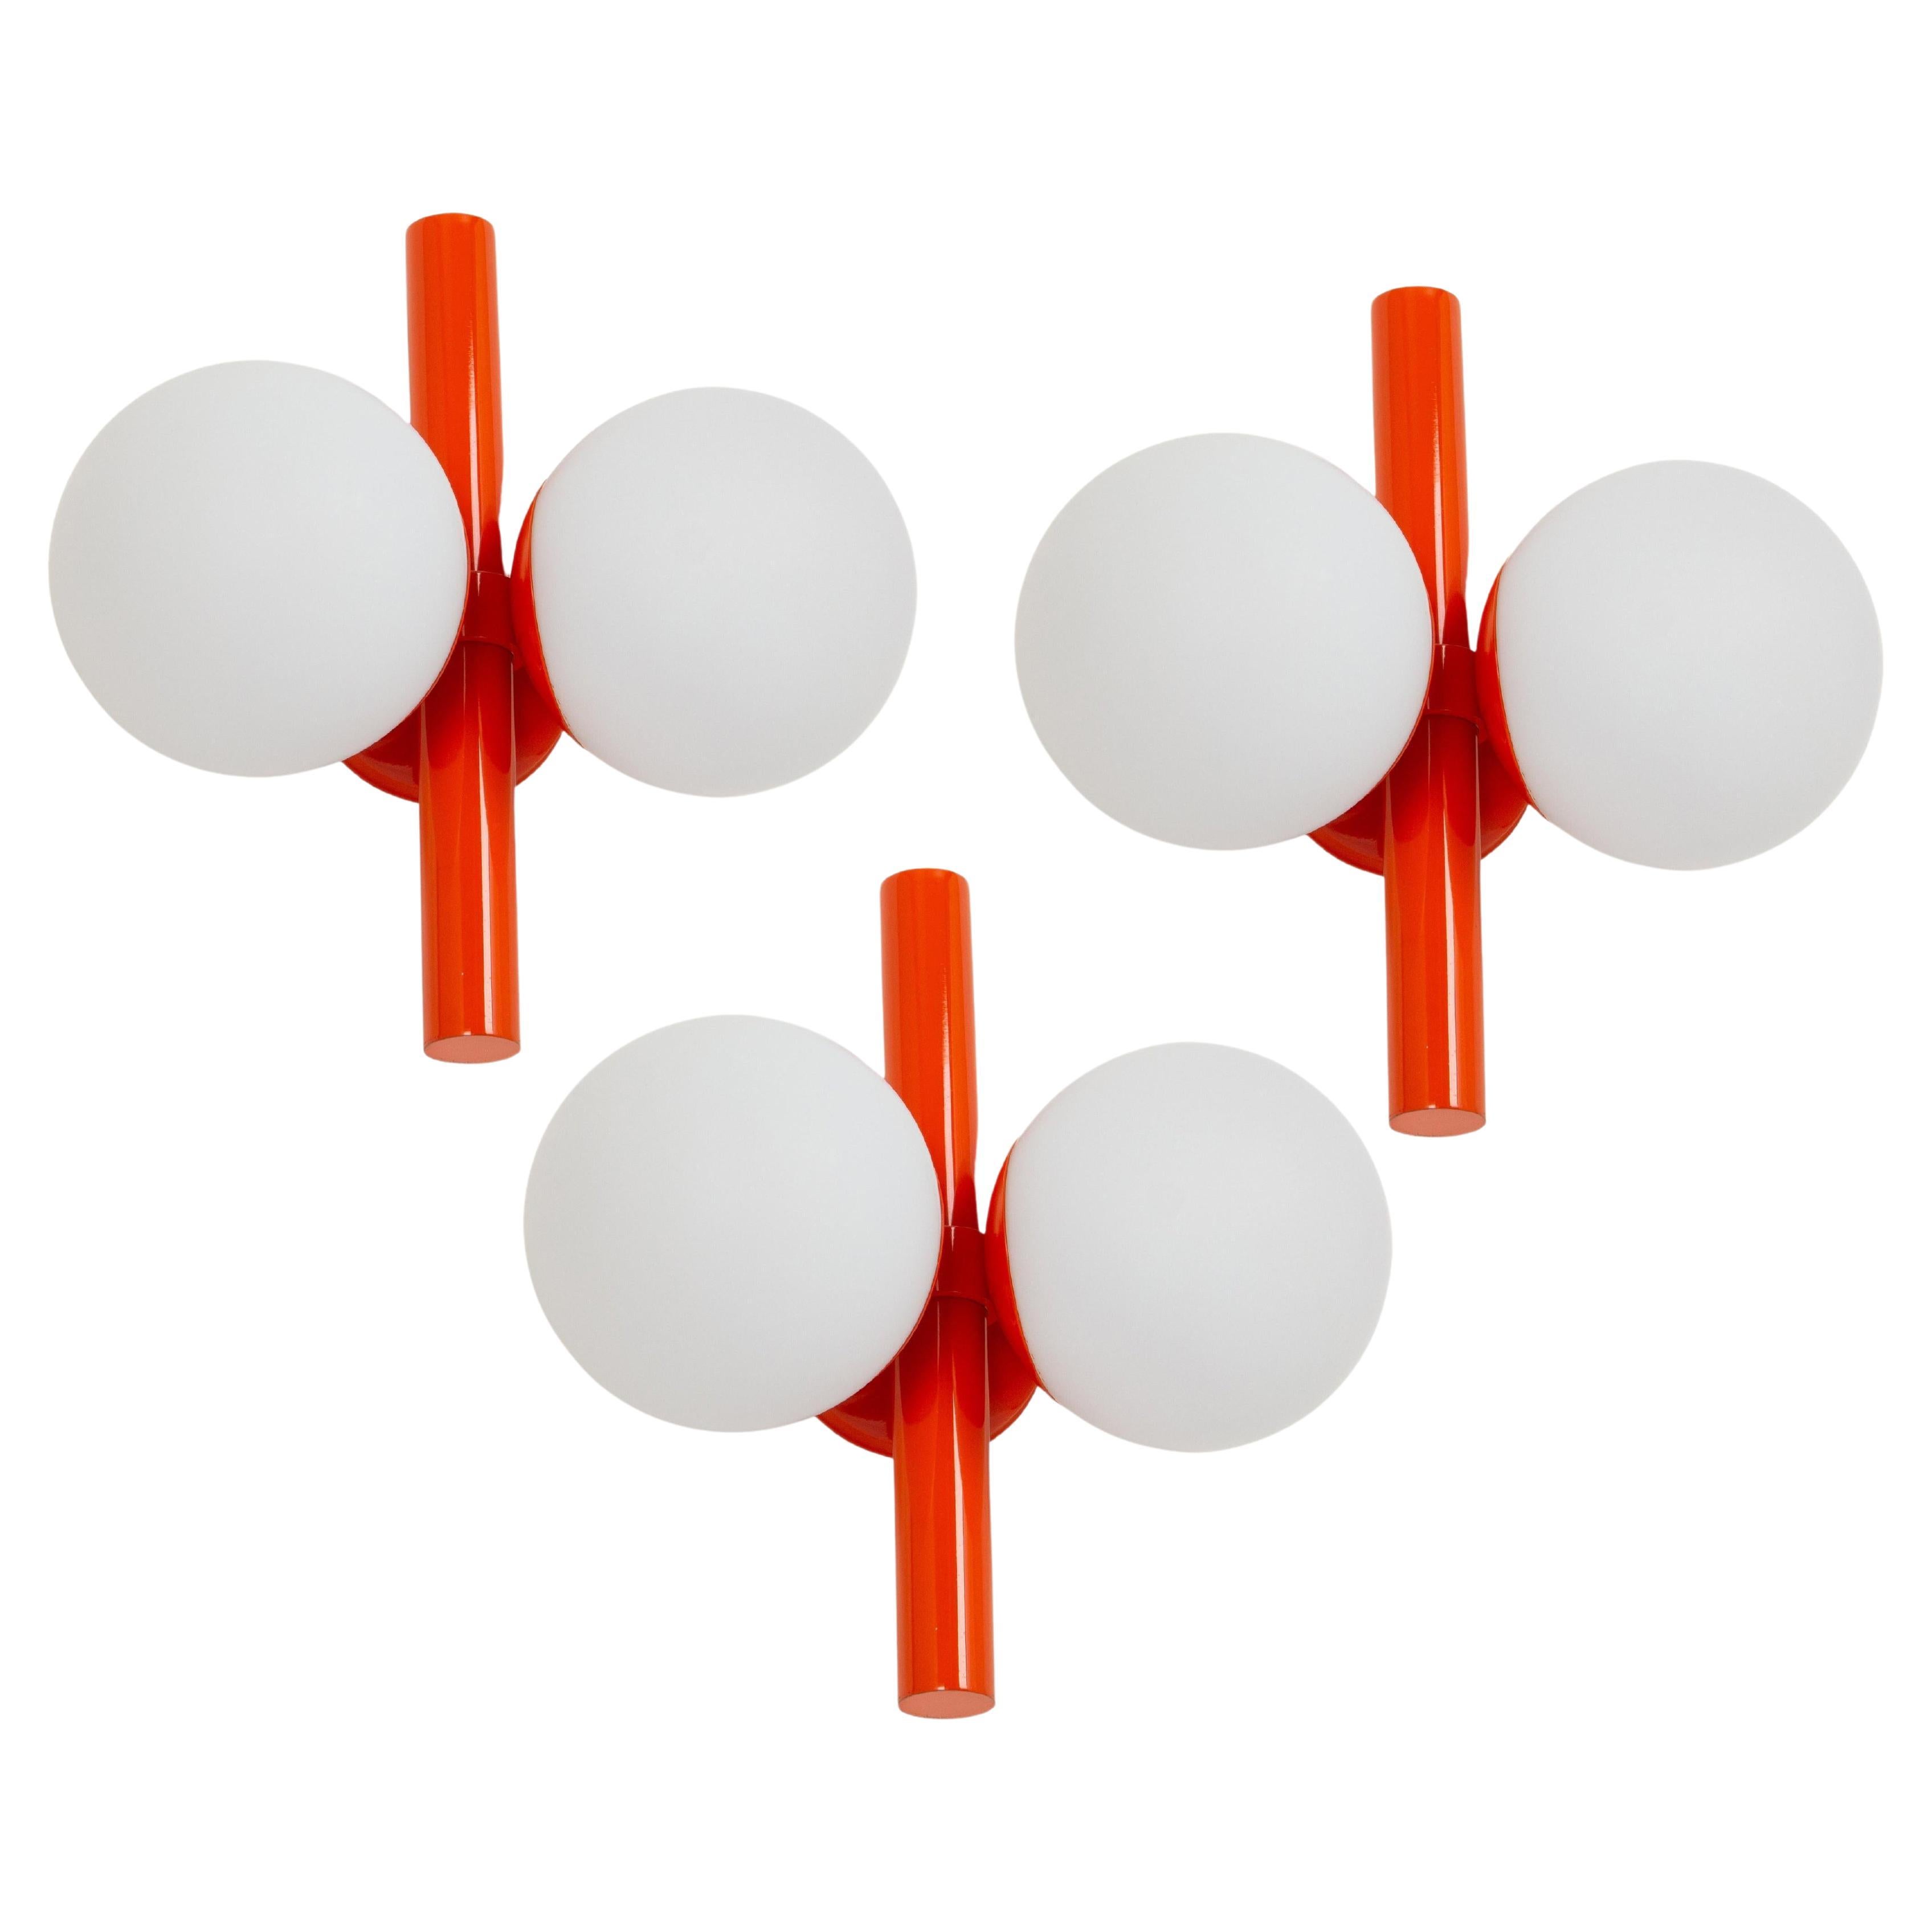 1 of 3 Midcentury Orbital Wall lights in Orange by Kaiser, Germany, 1970s For Sale